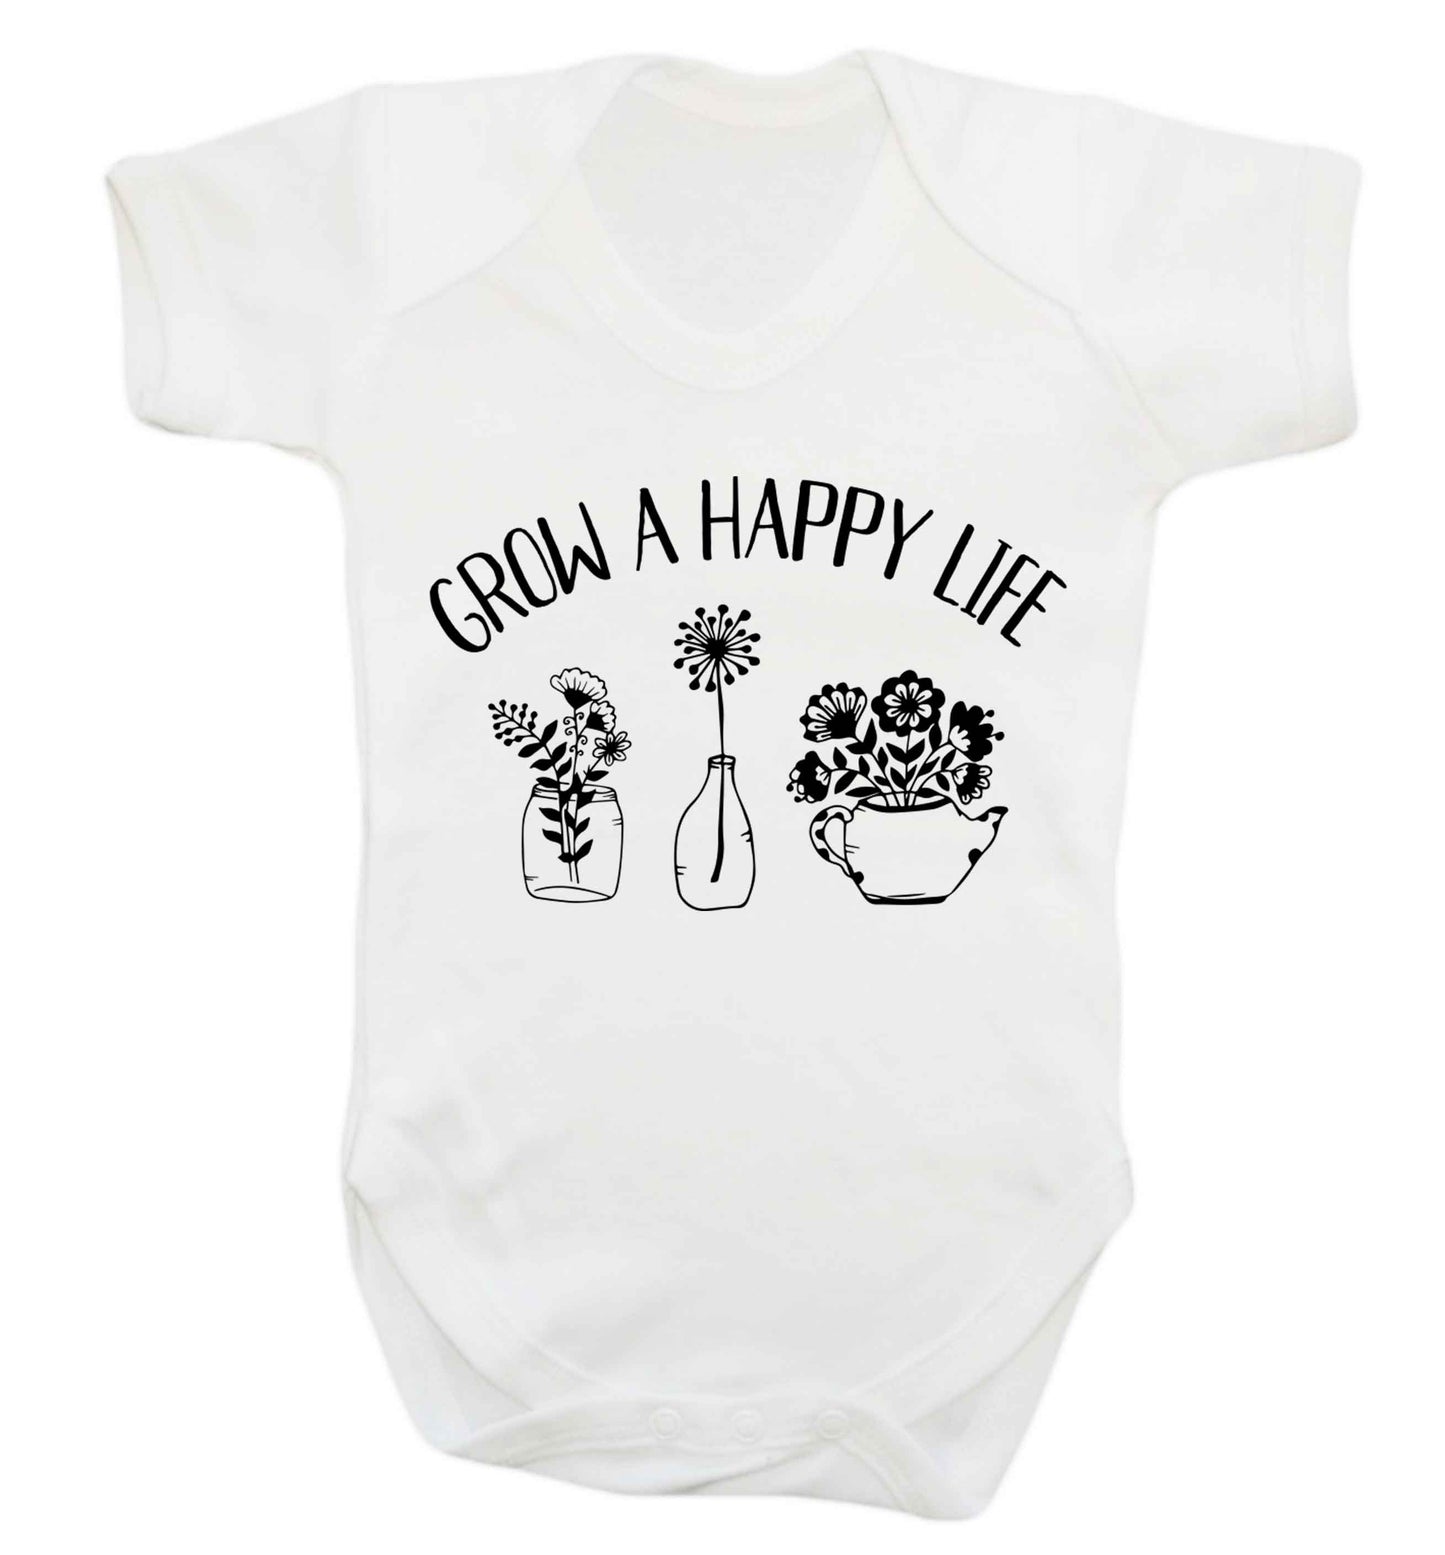 Grow a happy life Baby Vest white 18-24 months